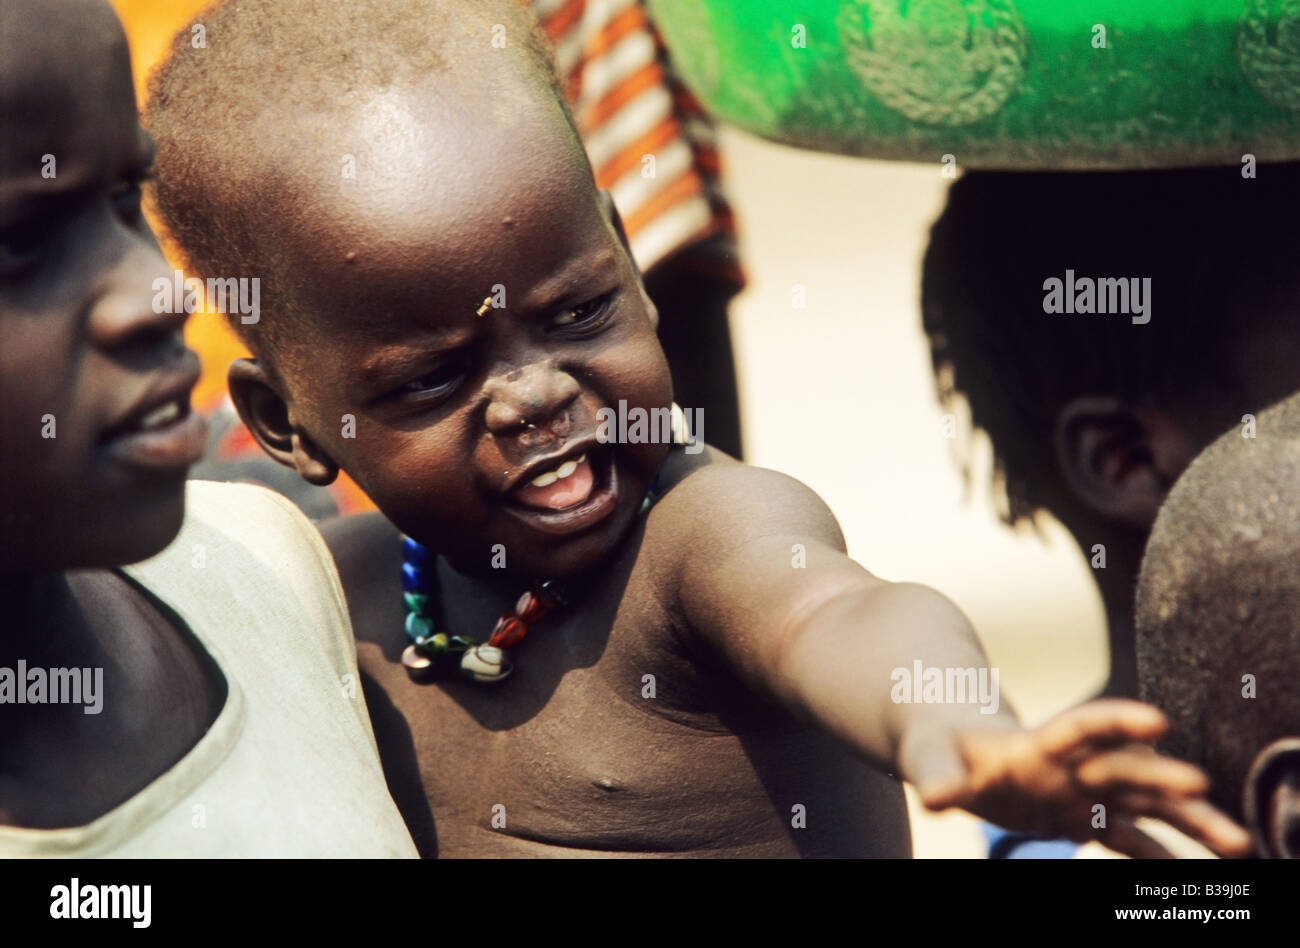 African children play together in their small village Stock Photo